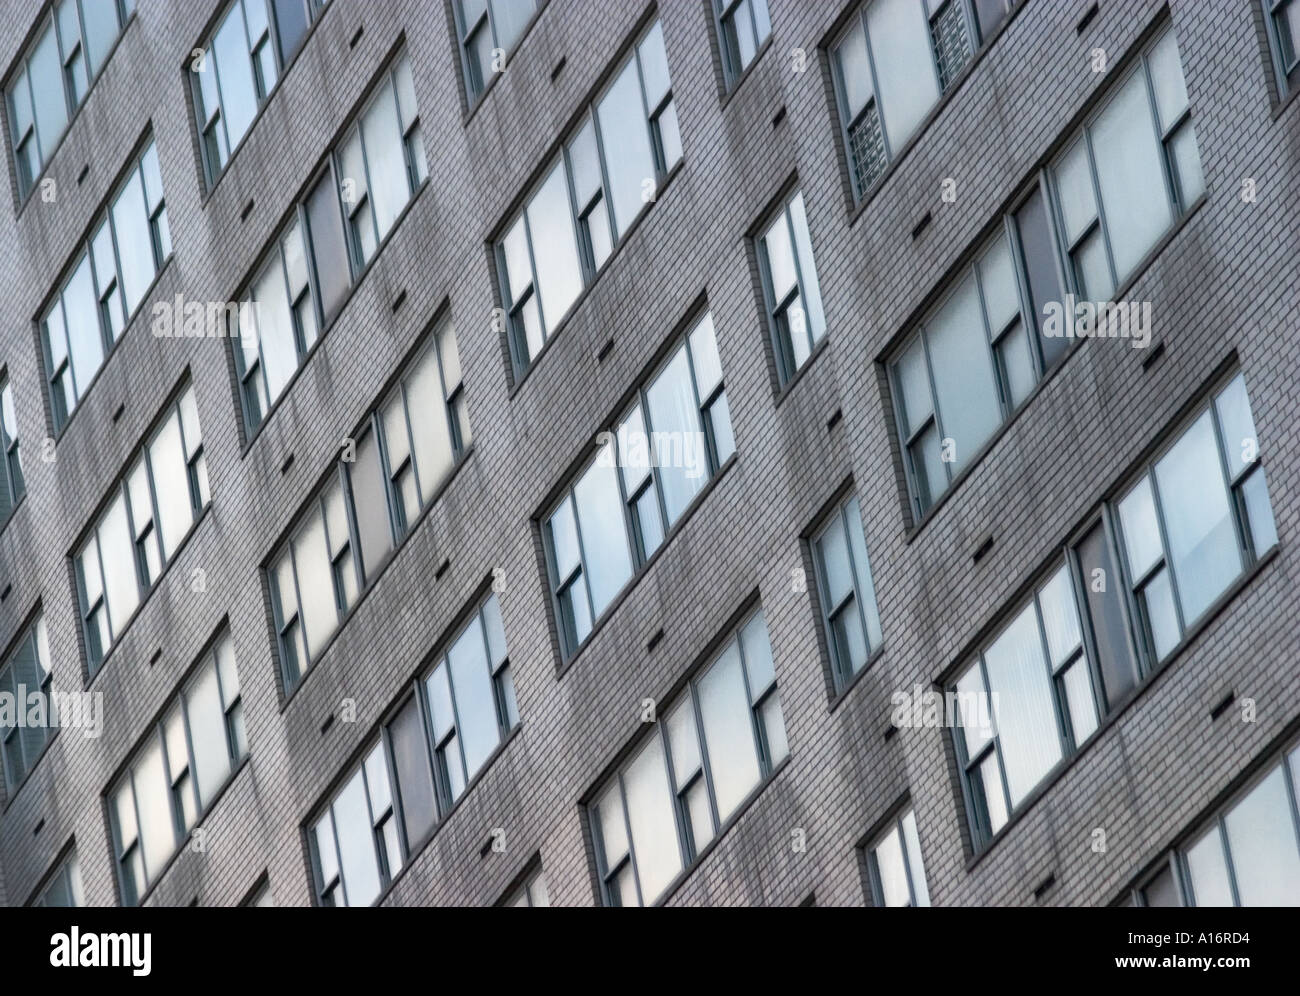 abstract pattern of building facade with bricks and windows Stock Photo